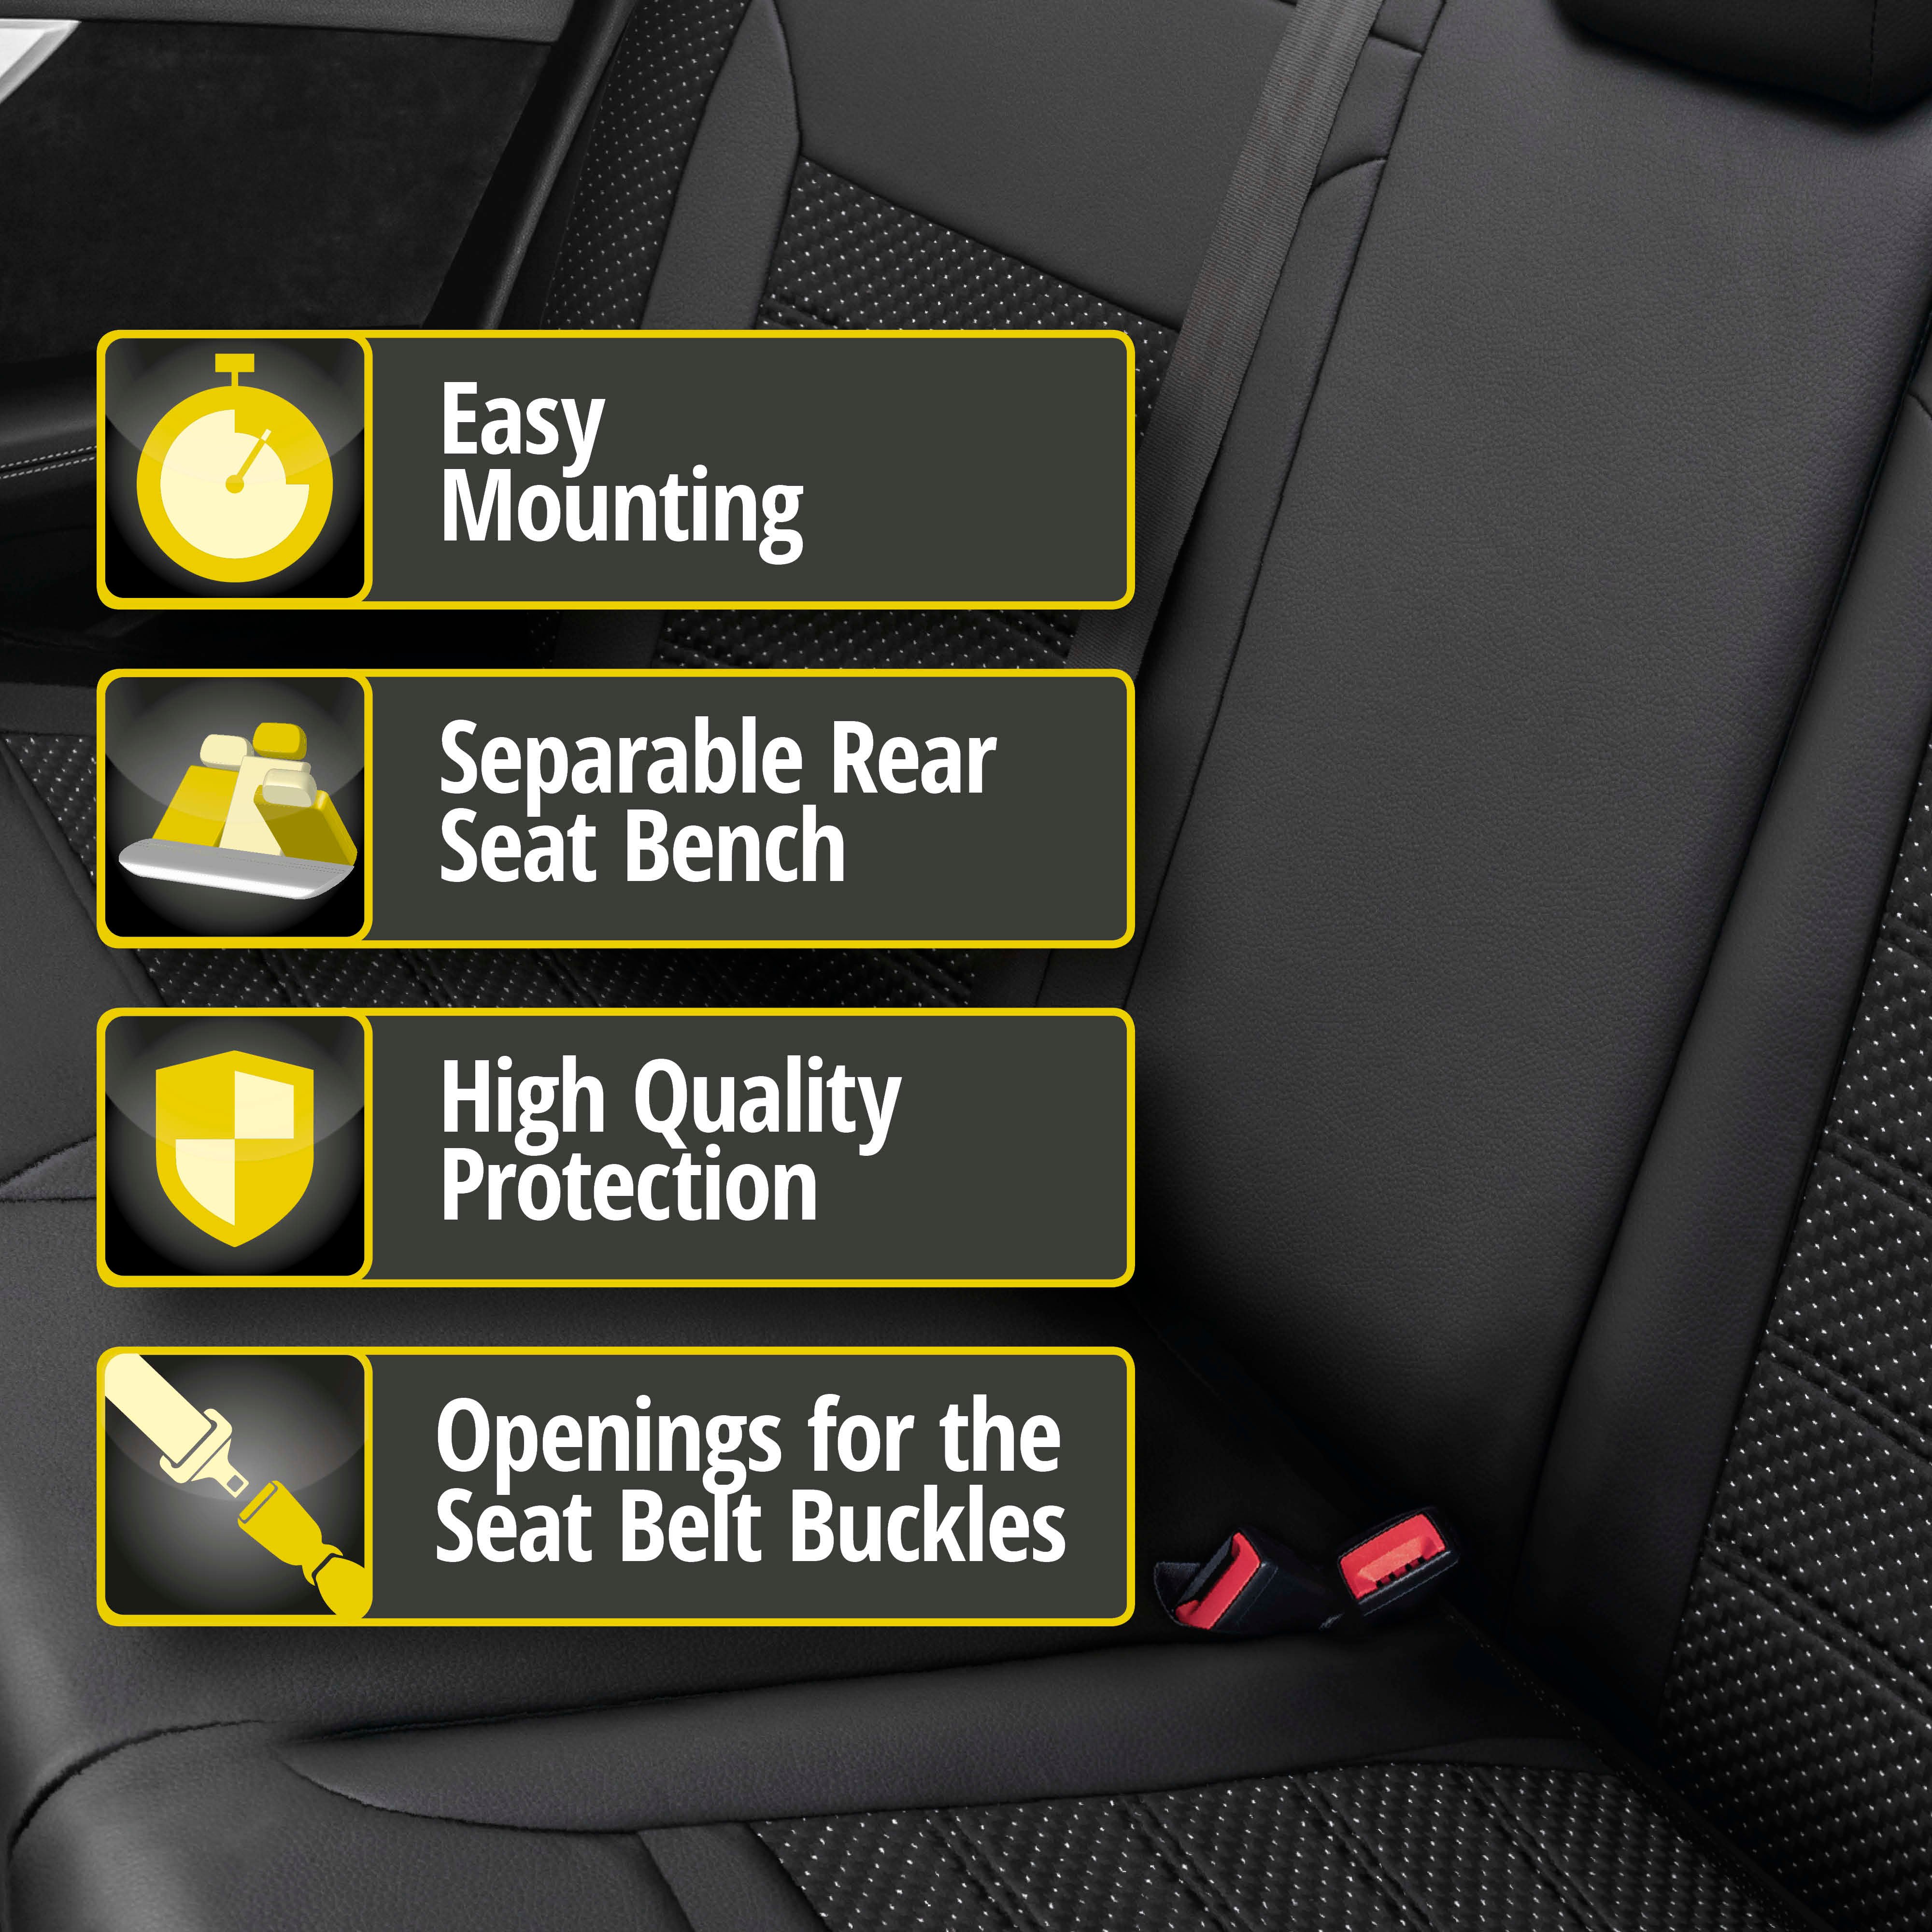 Seat cover Torino for VW Polo Highline from 2017-Today, 1 rear seat cover for normal seats